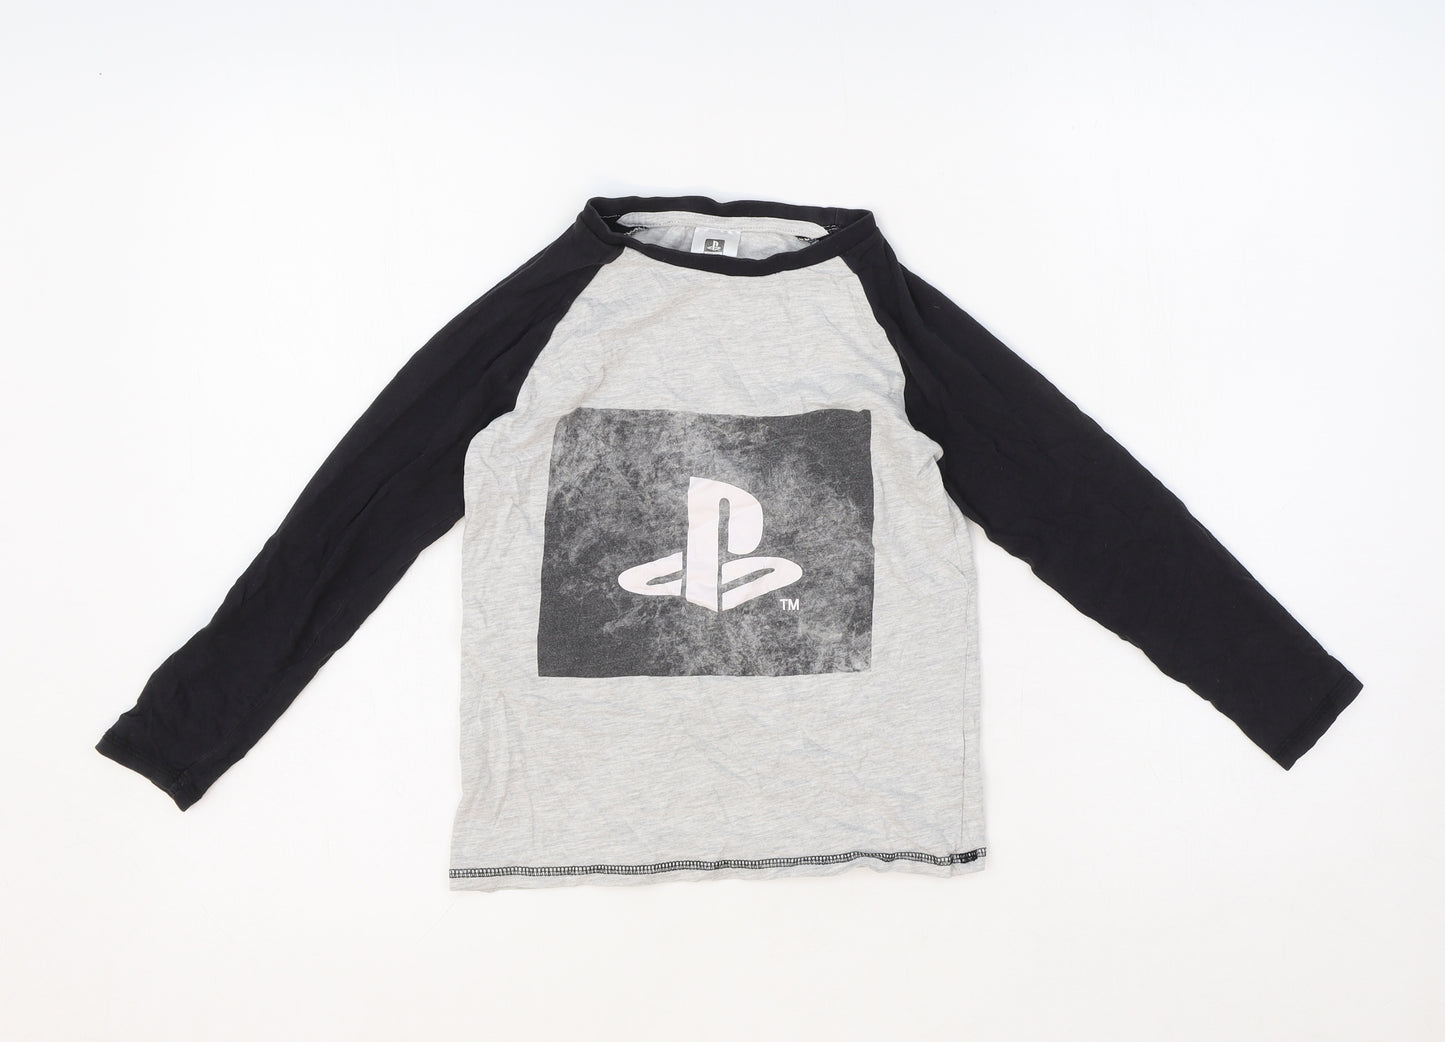 PlayStation Boys Black Cotton Basic T-Shirt Size 6-7 Years Round Neck Pullover